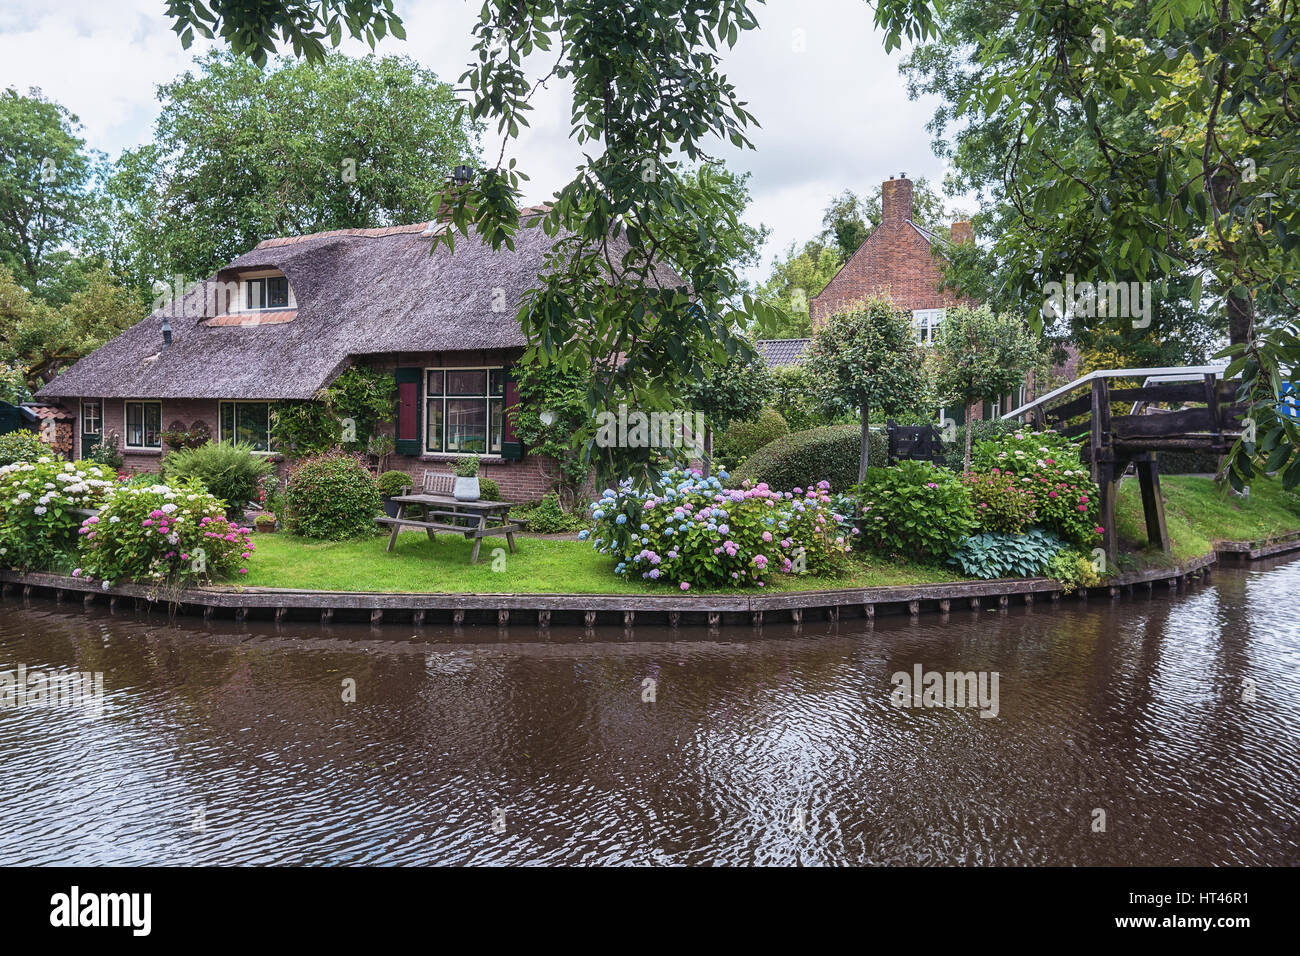 Giethoorn, Netherlands – June 29, 2016: View of a blooming garden in front of the house of the Dutch town. Stock Photo